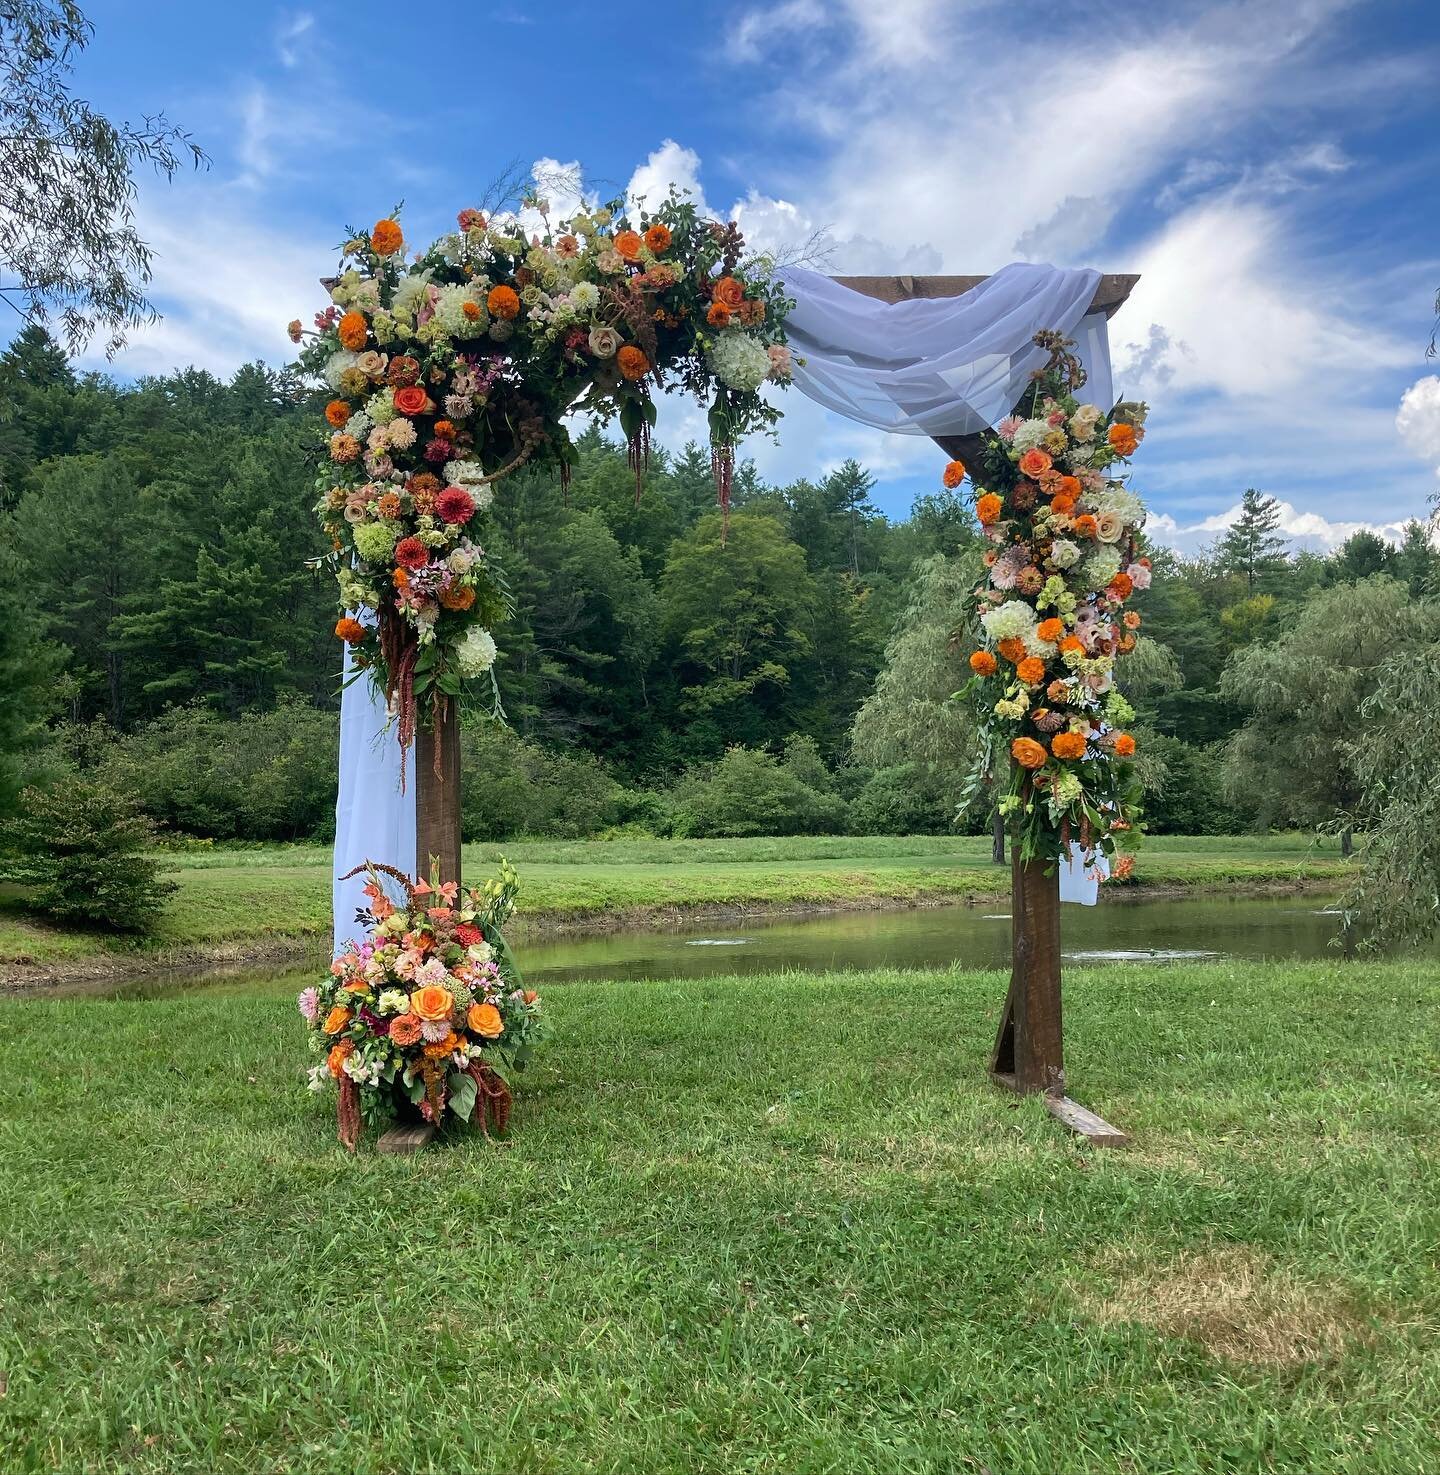 Marigold Summertime&hellip;

This is arch was a part of a gorgeous wedding in Grafton Vermont. So glad we were able to design such lovely bouquets for this celebration!

#vermontwedding #vermontbyvermonters #vtfarmwifeflowers #ayearinflowers